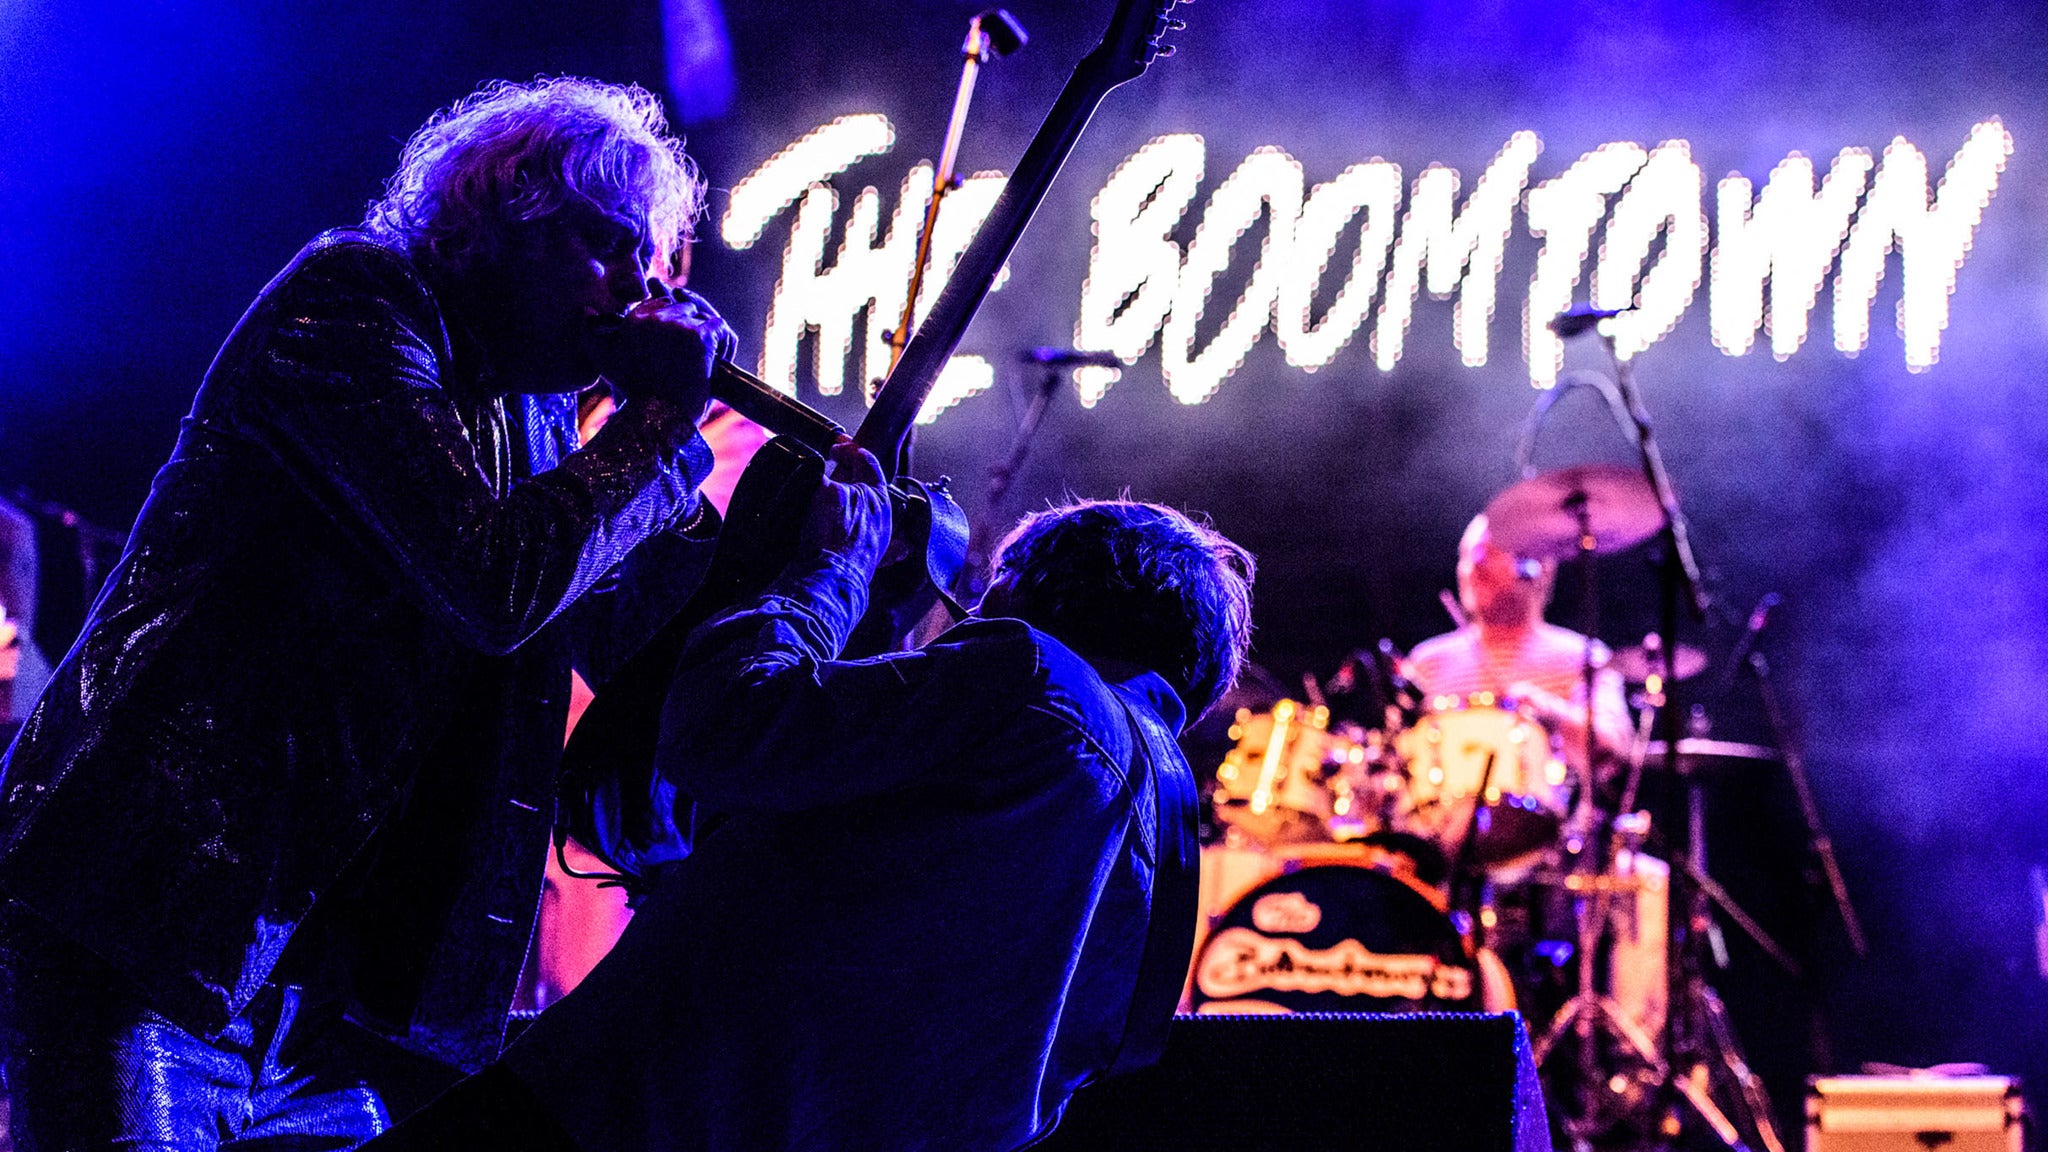 The Boomtown Rats at Birmingham Town Hall on Sat 4th September 2021